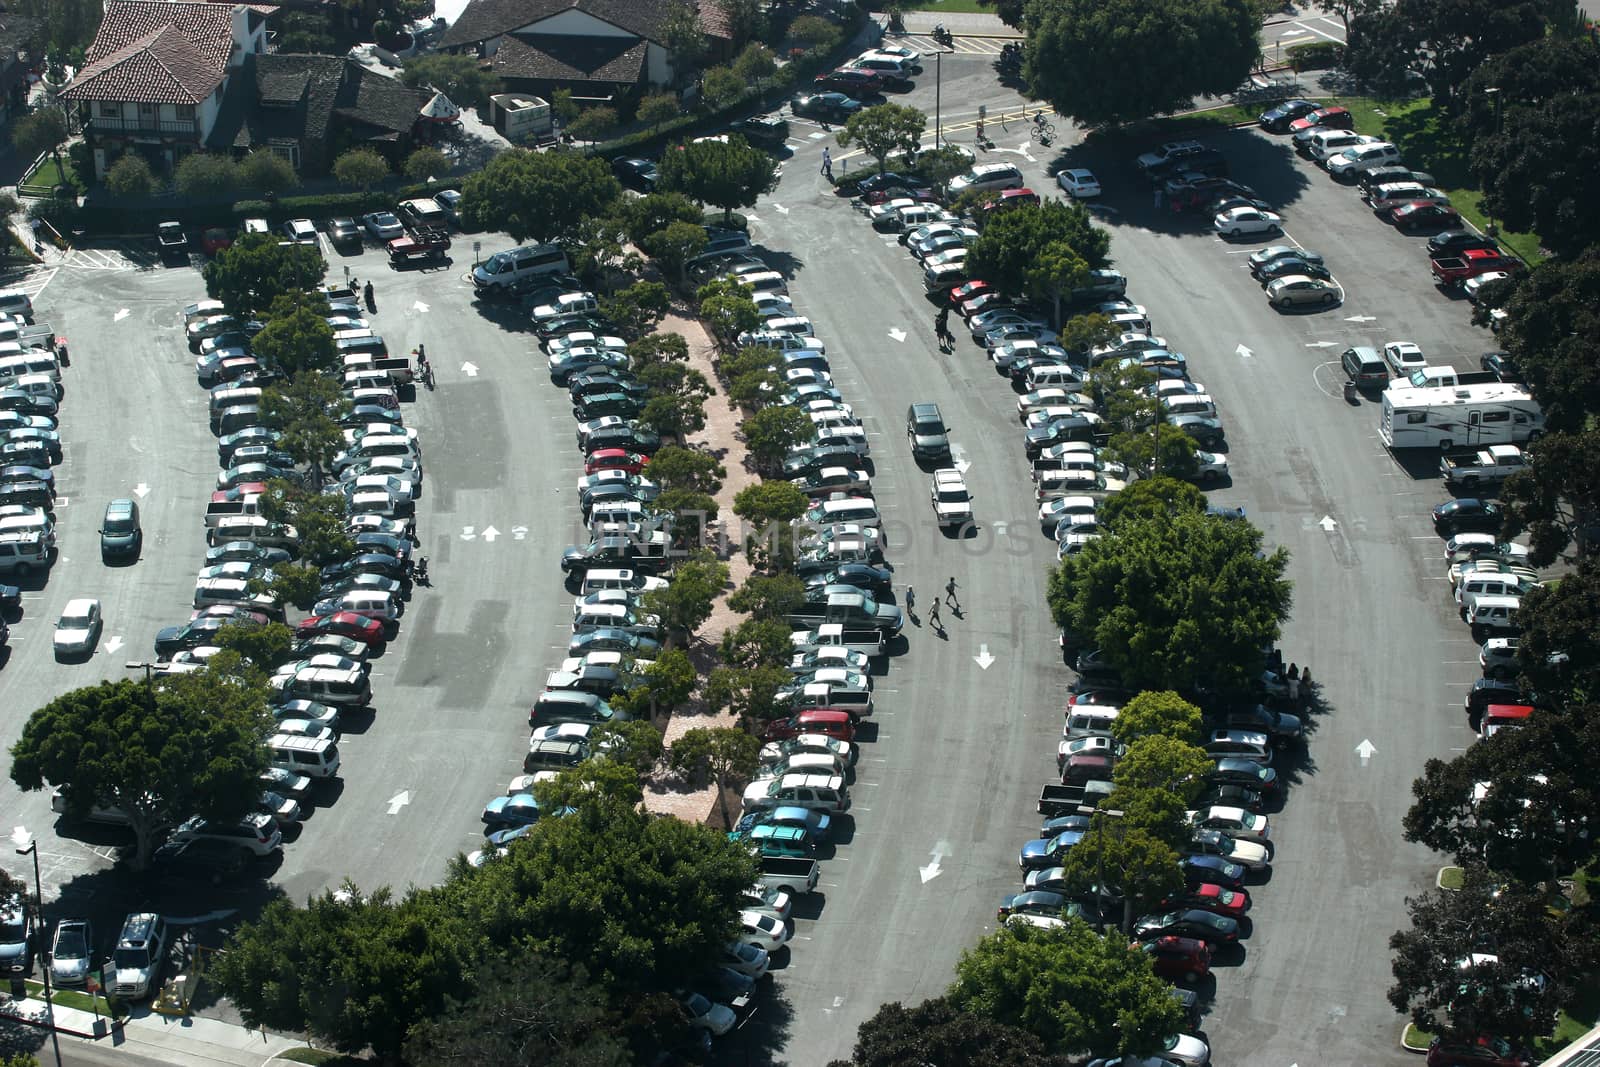 Aerial view of crowded parking lot